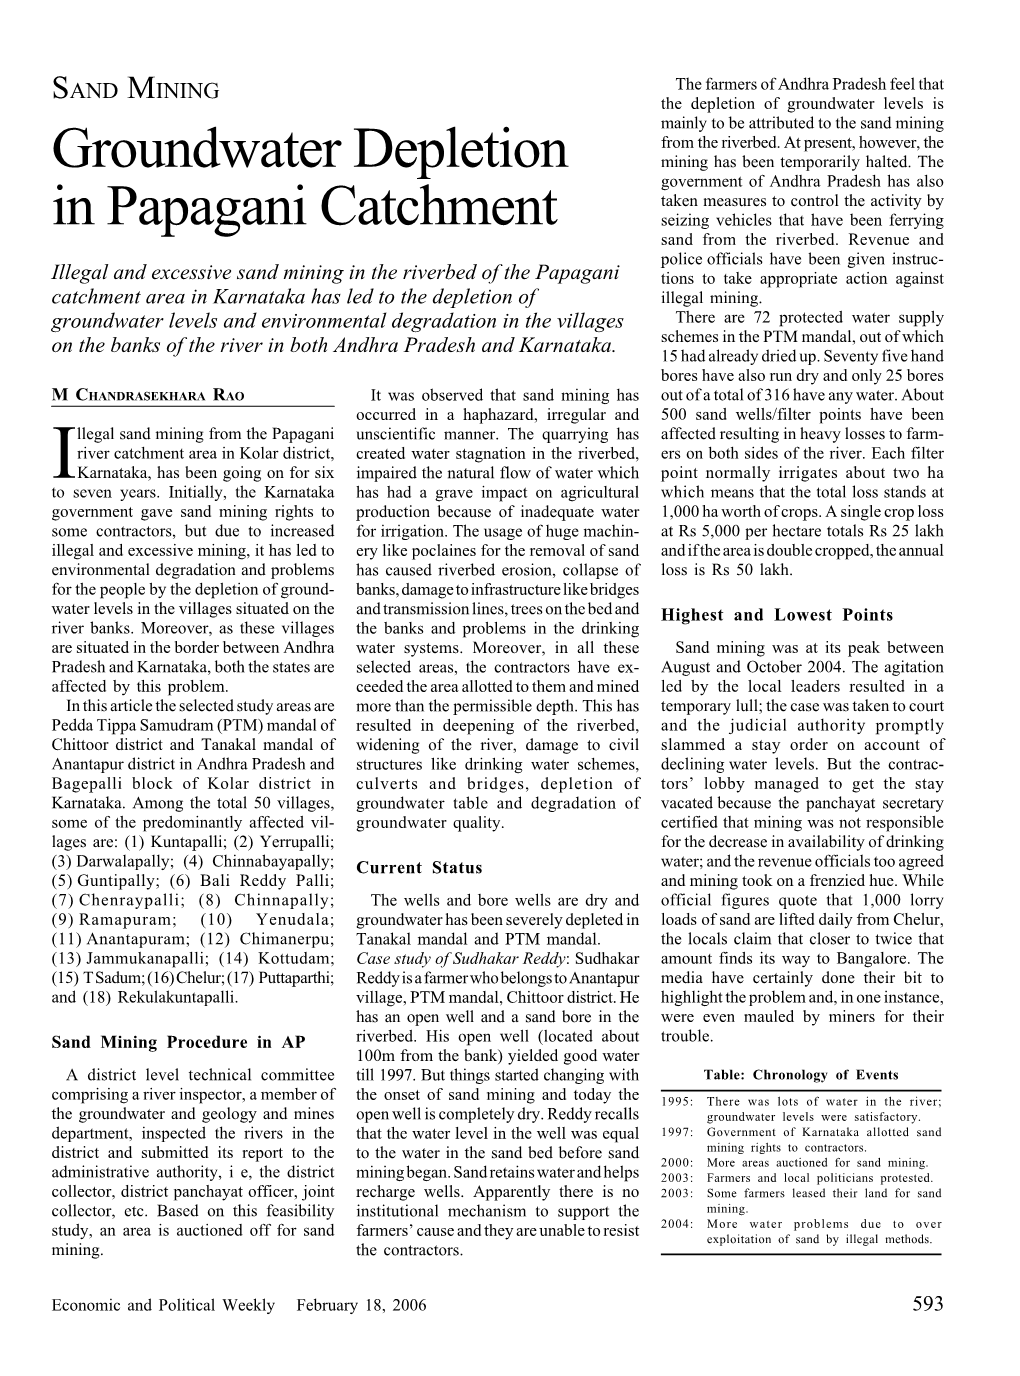 Groundwater Depletion in Papagani Catchment